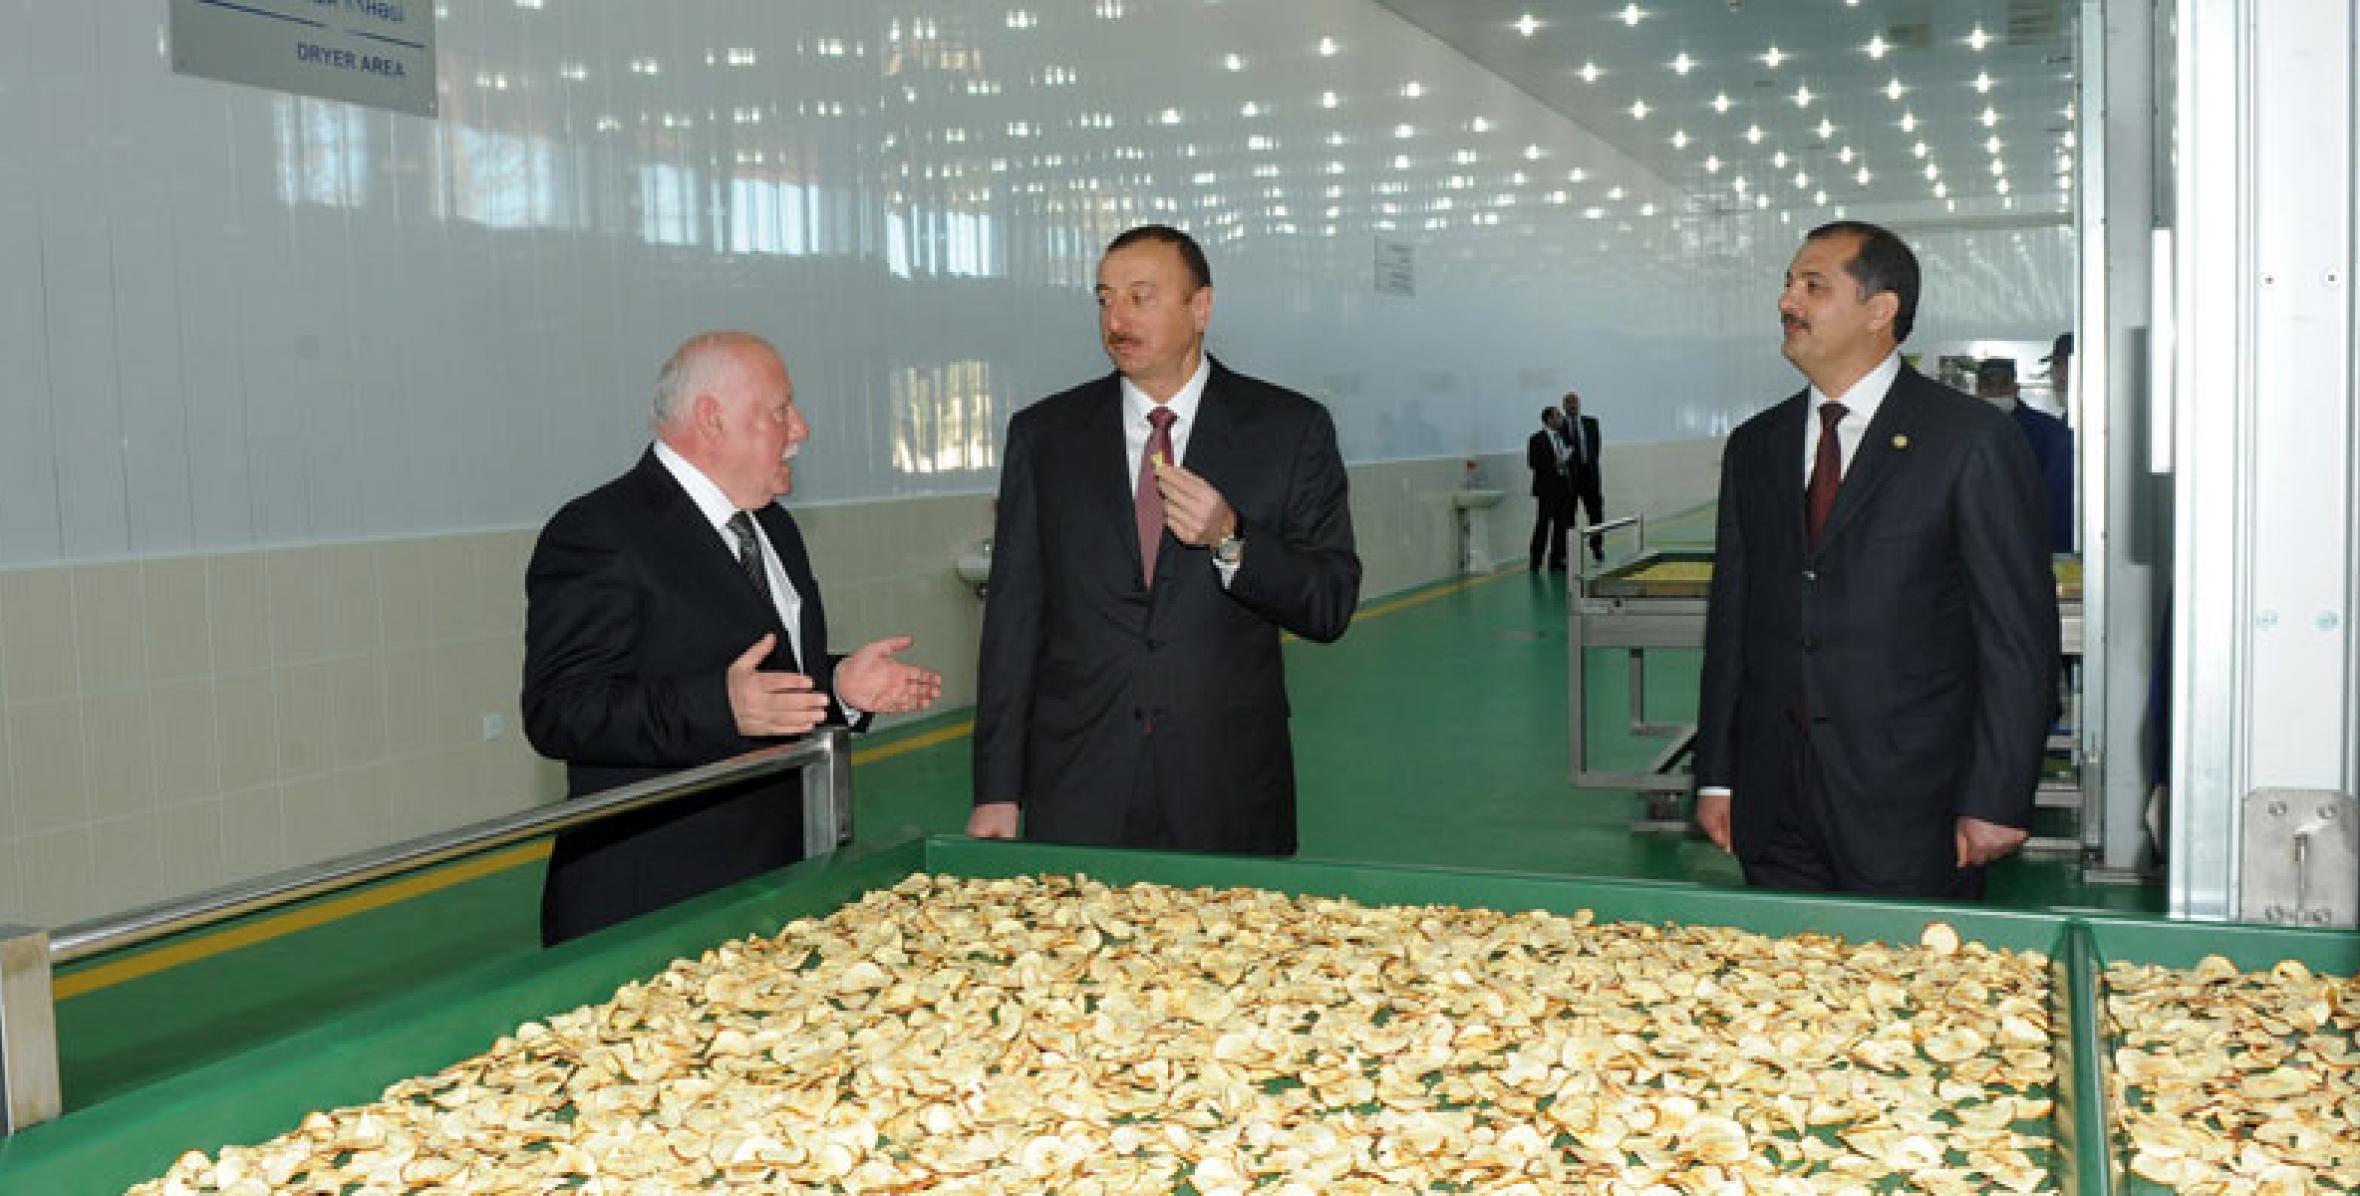 Ilham Aliyev took part in the opening of a fruit drying and processing facility in Samukh